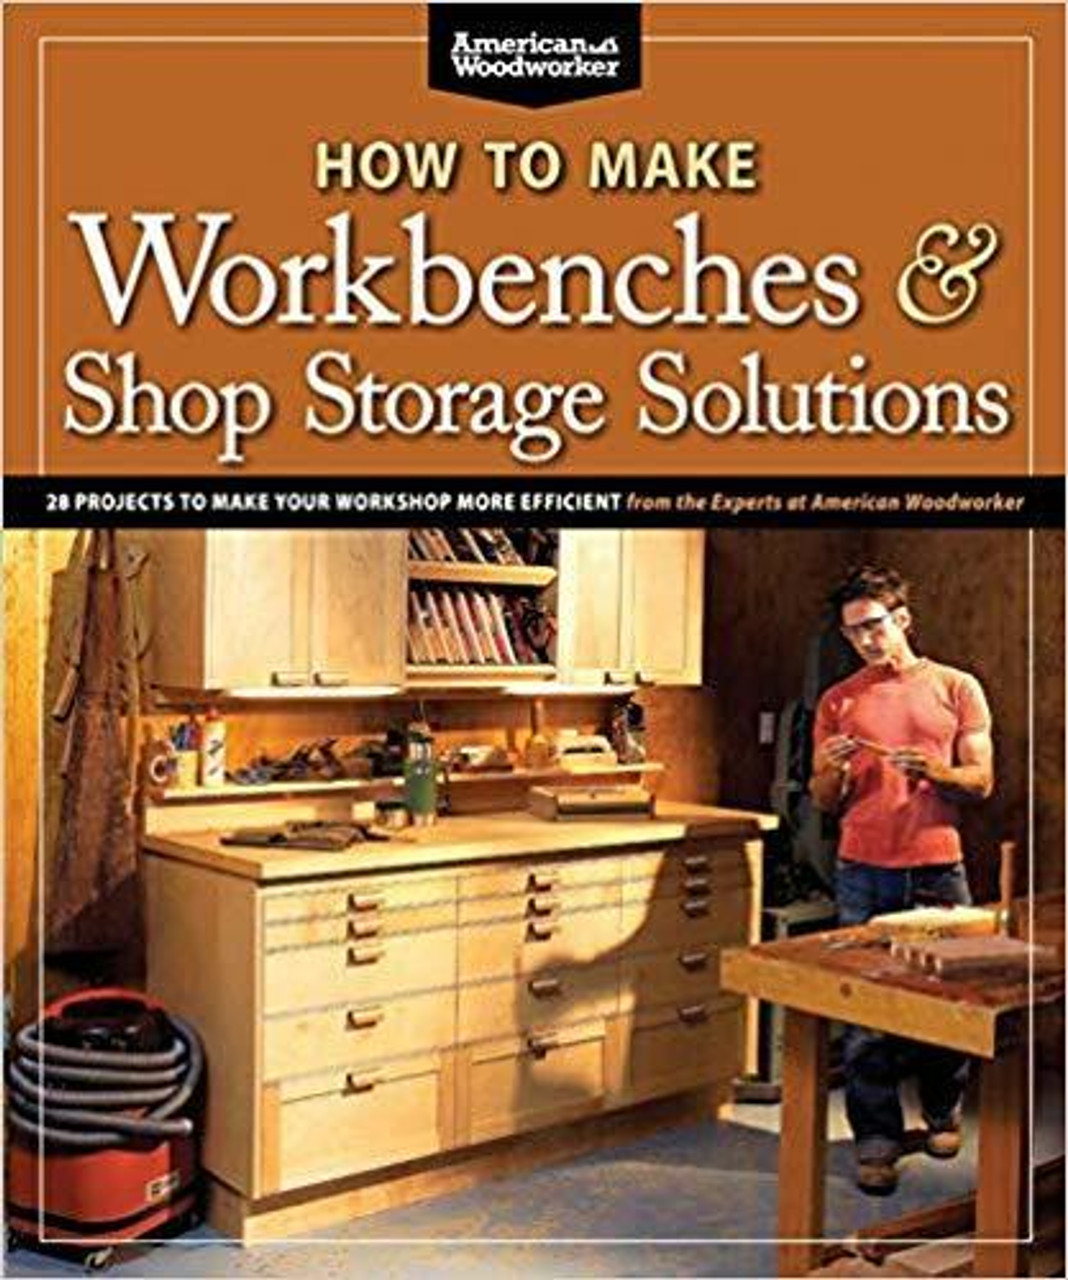 https://cdn11.bigcommerce.com/s-jhzpn4wnp8/images/stencil/1280x1280/products/6385/8551/fox-chapel-publishing-how-to-make-workbenches-and-shop-storage-solutions__44792.1650384189.jpg?c=2